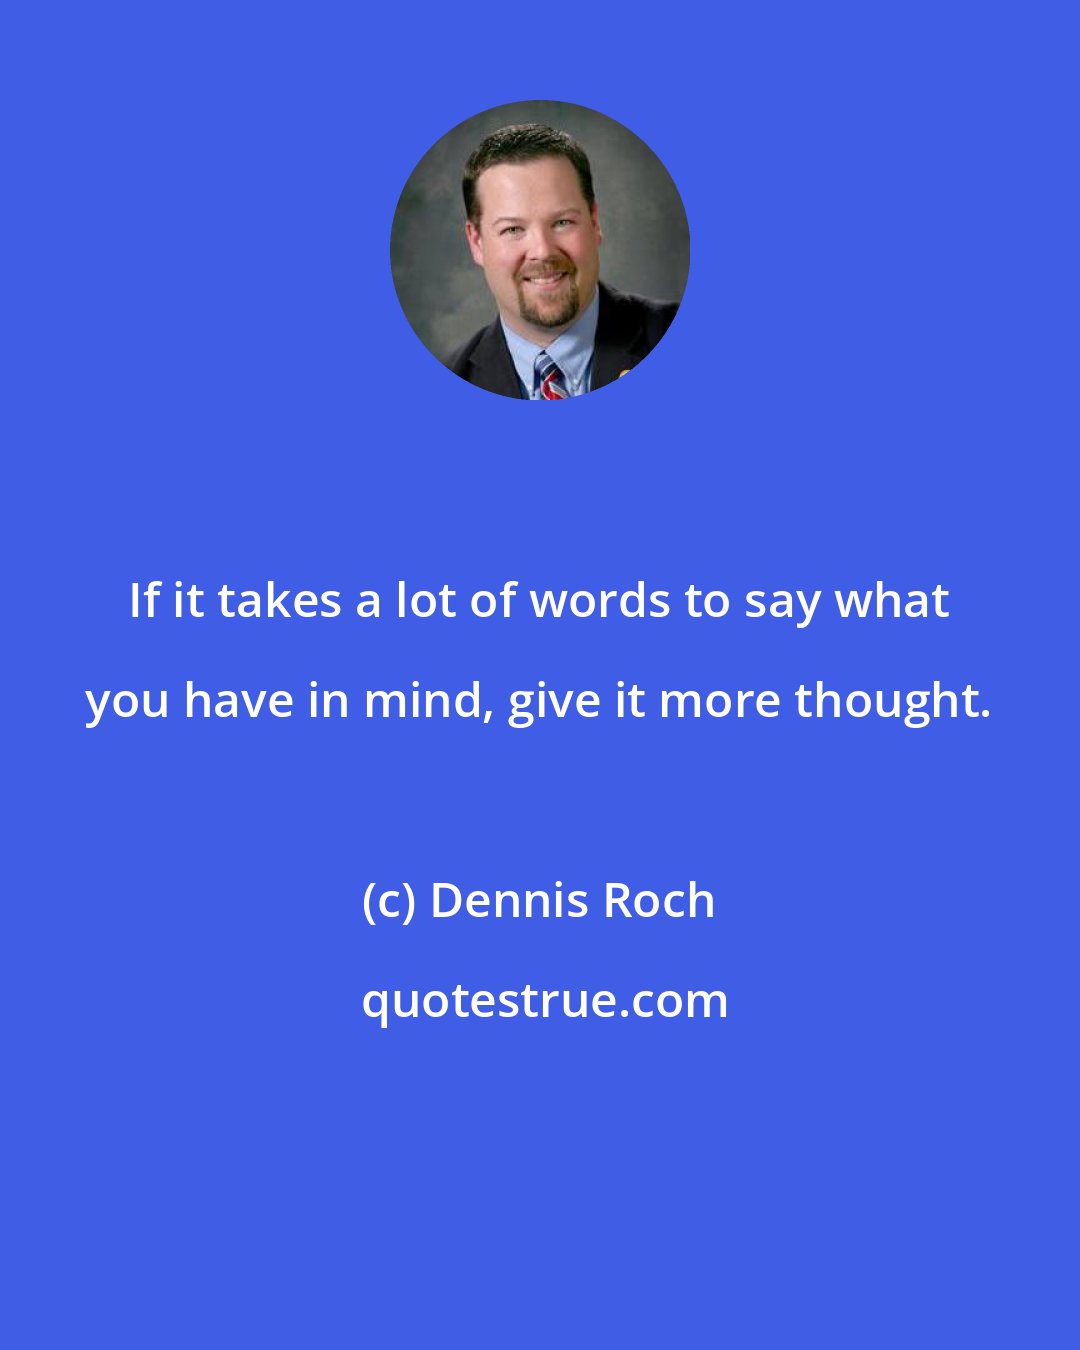 Dennis Roch: If it takes a lot of words to say what you have in mind, give it more thought.